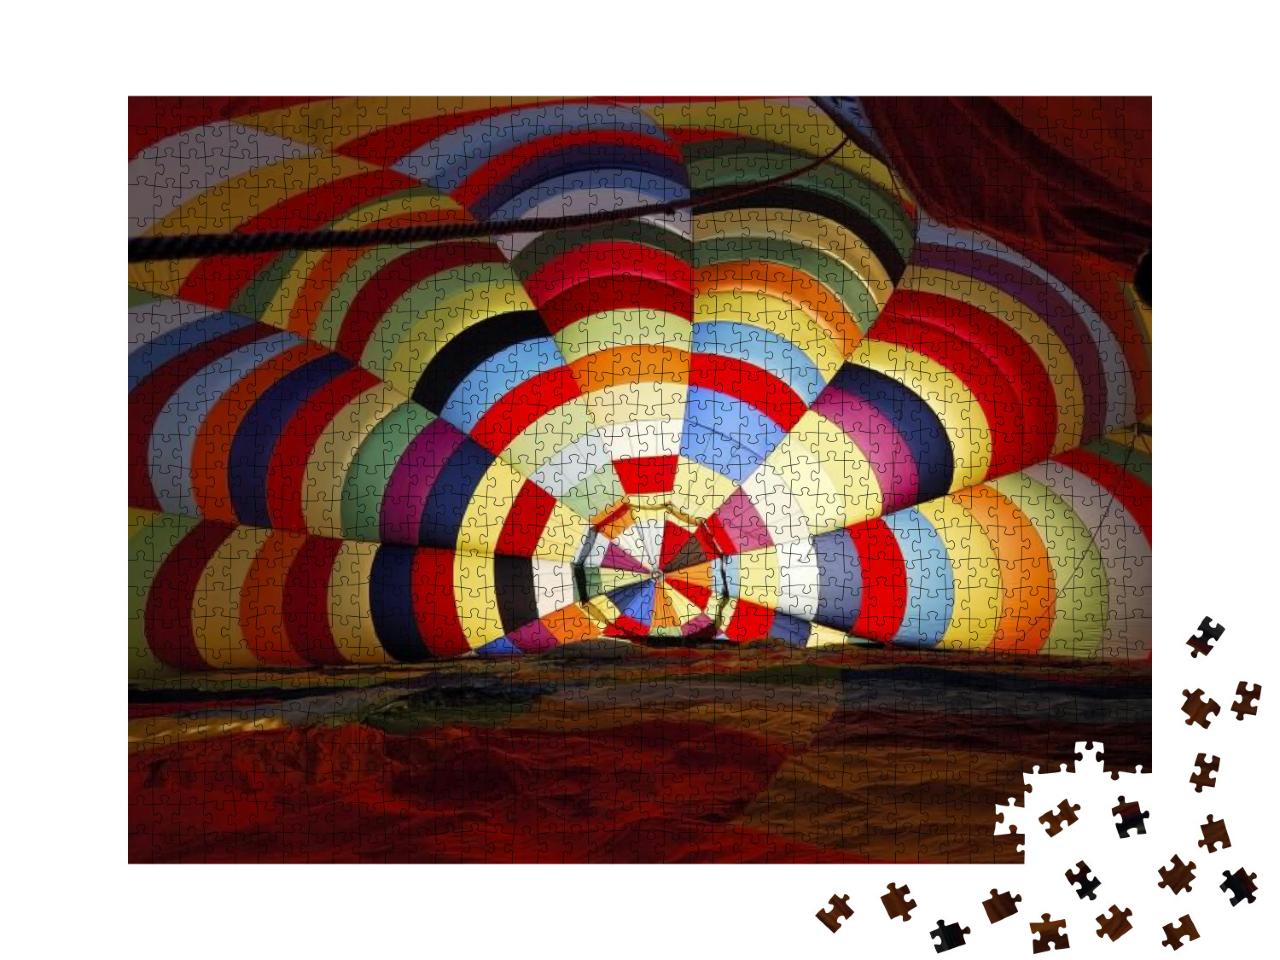 Hot Air Balloon, Winter Season... Jigsaw Puzzle with 1000 pieces